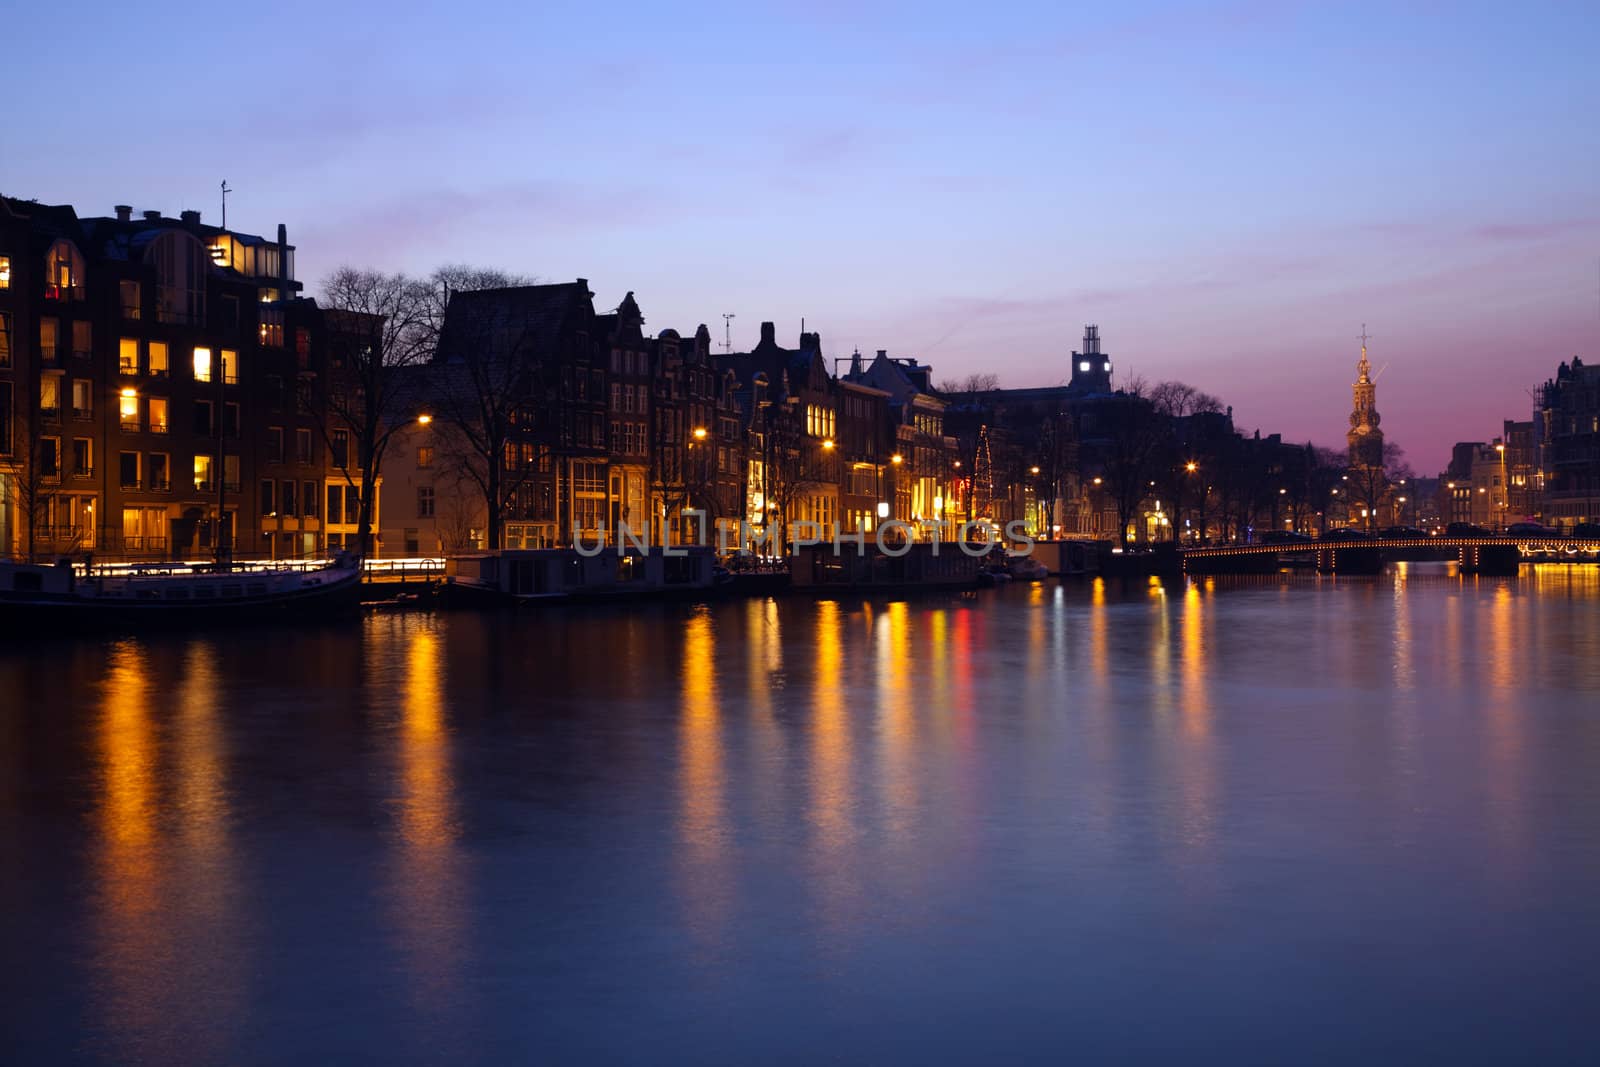 Evening in Amsterdam by benkrut